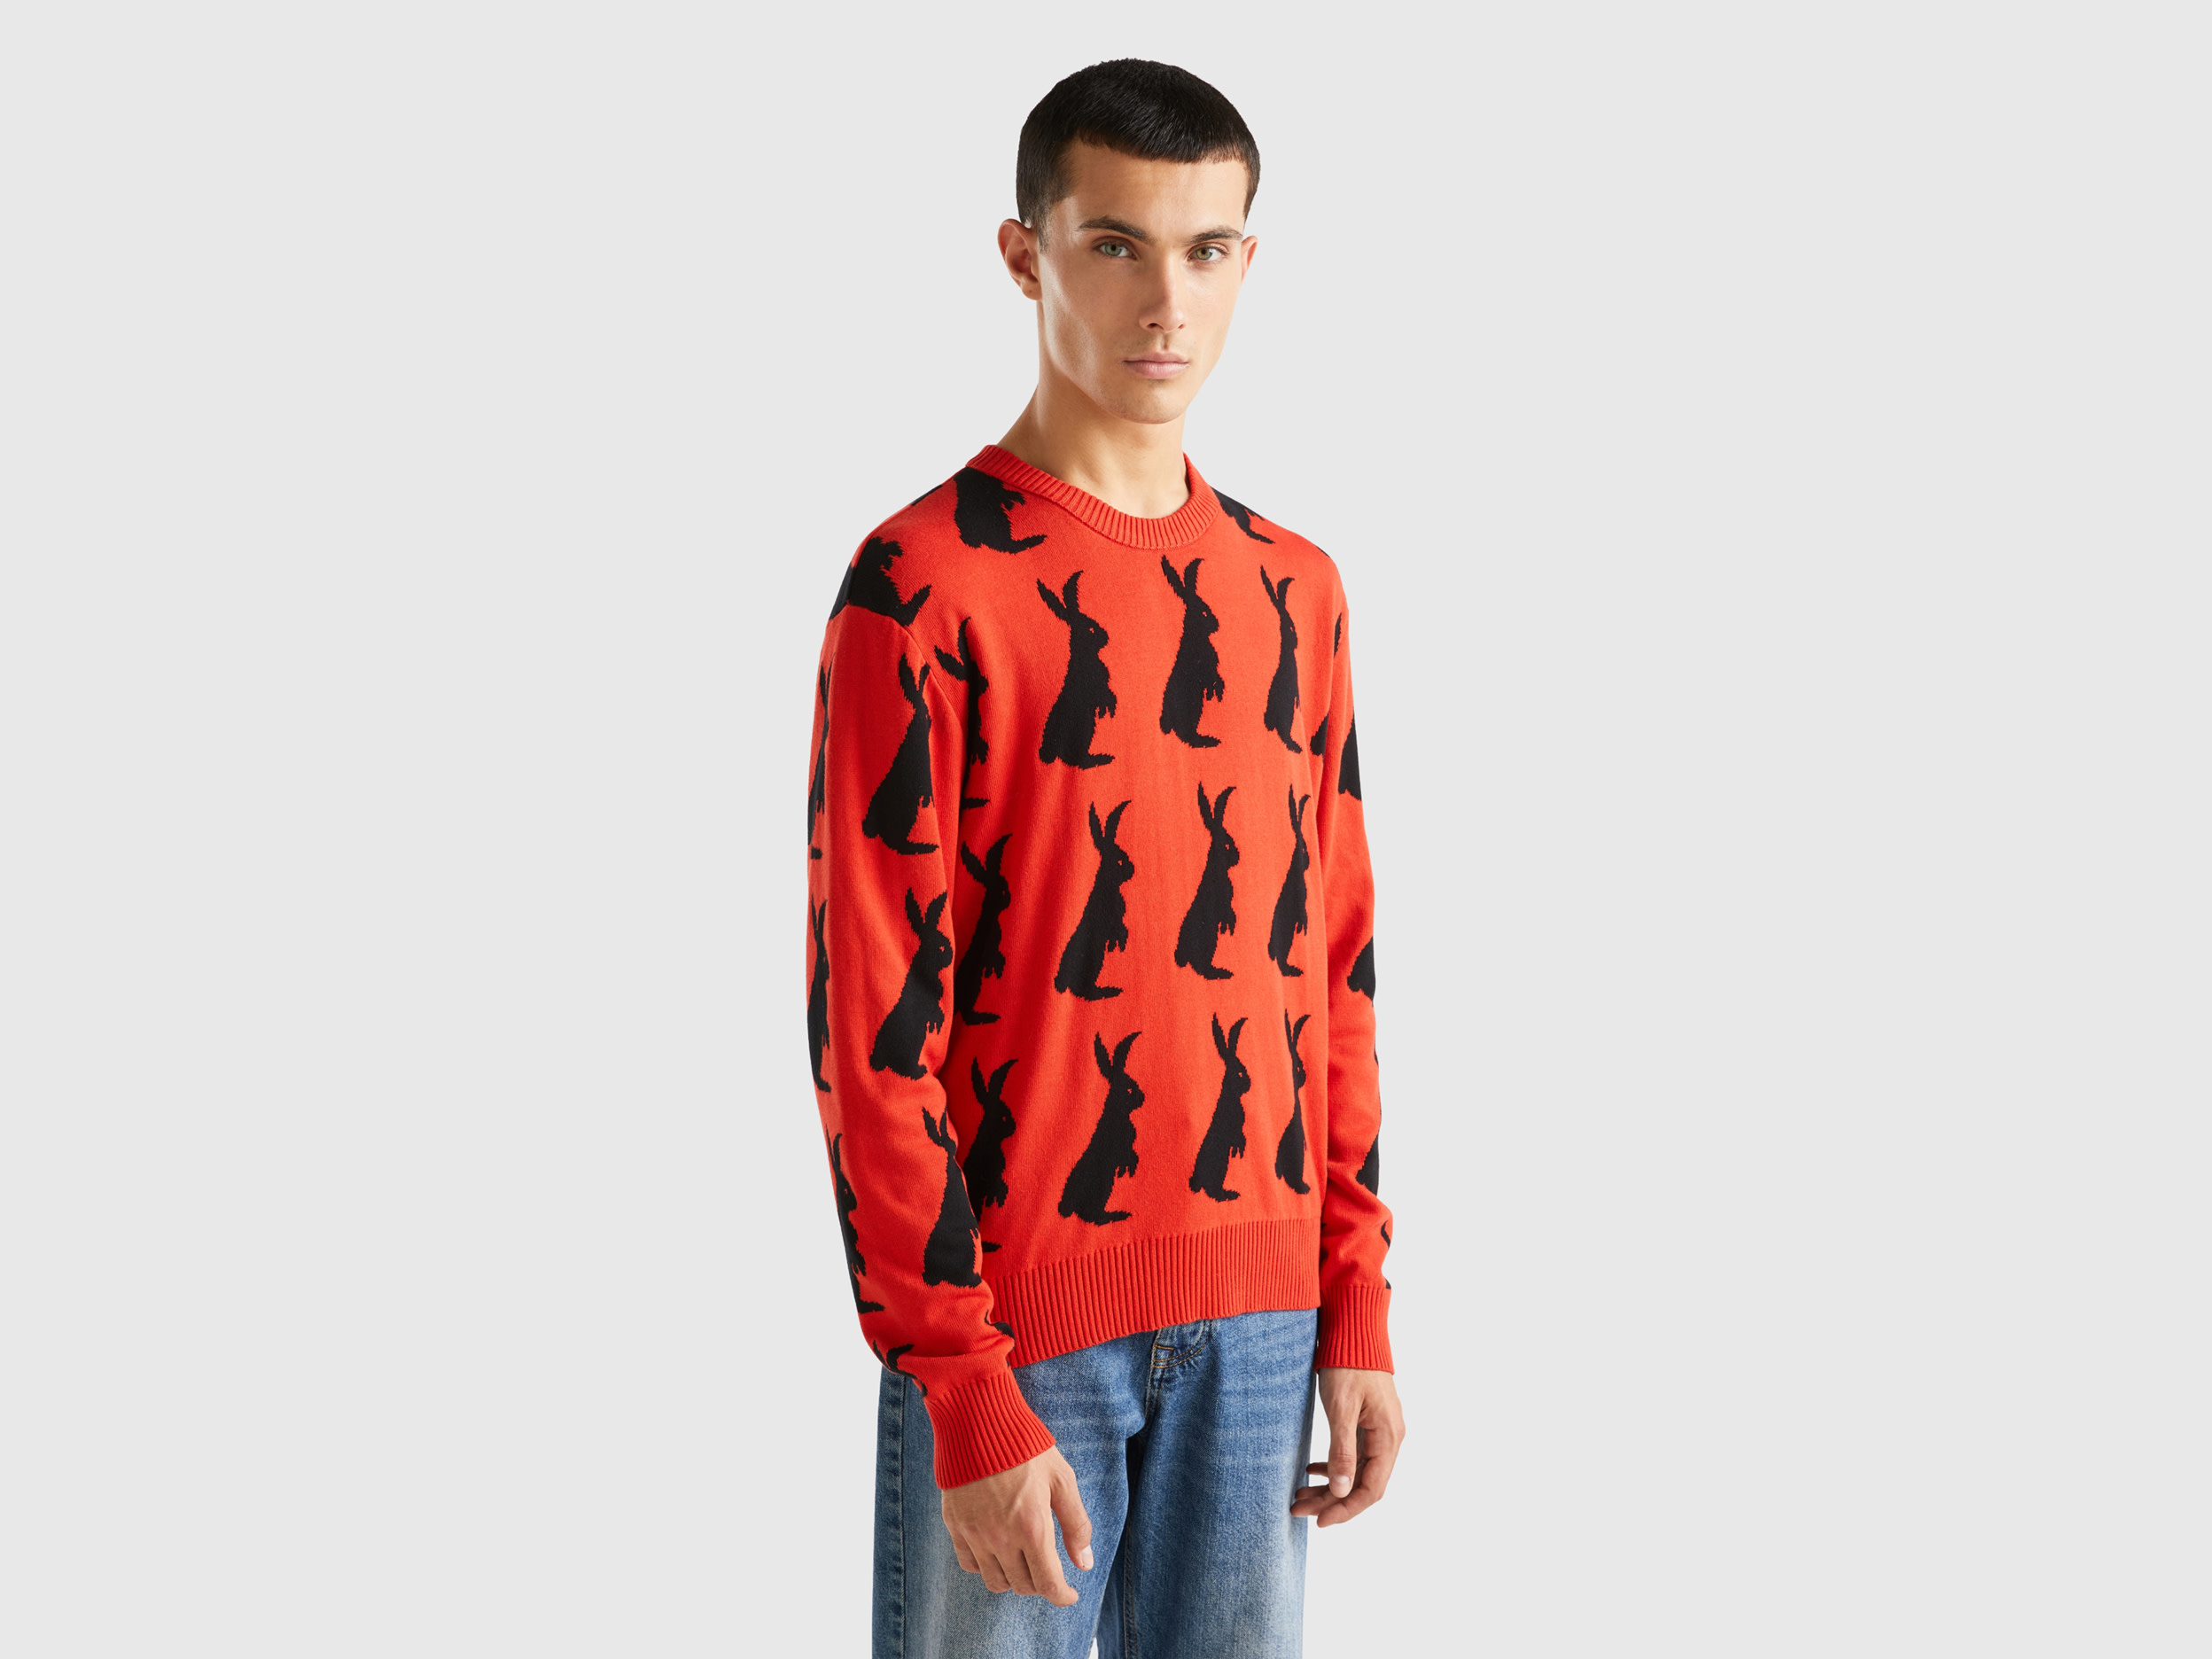 Benetton, Sweater With Bunny Pattern, size M, Red, Men